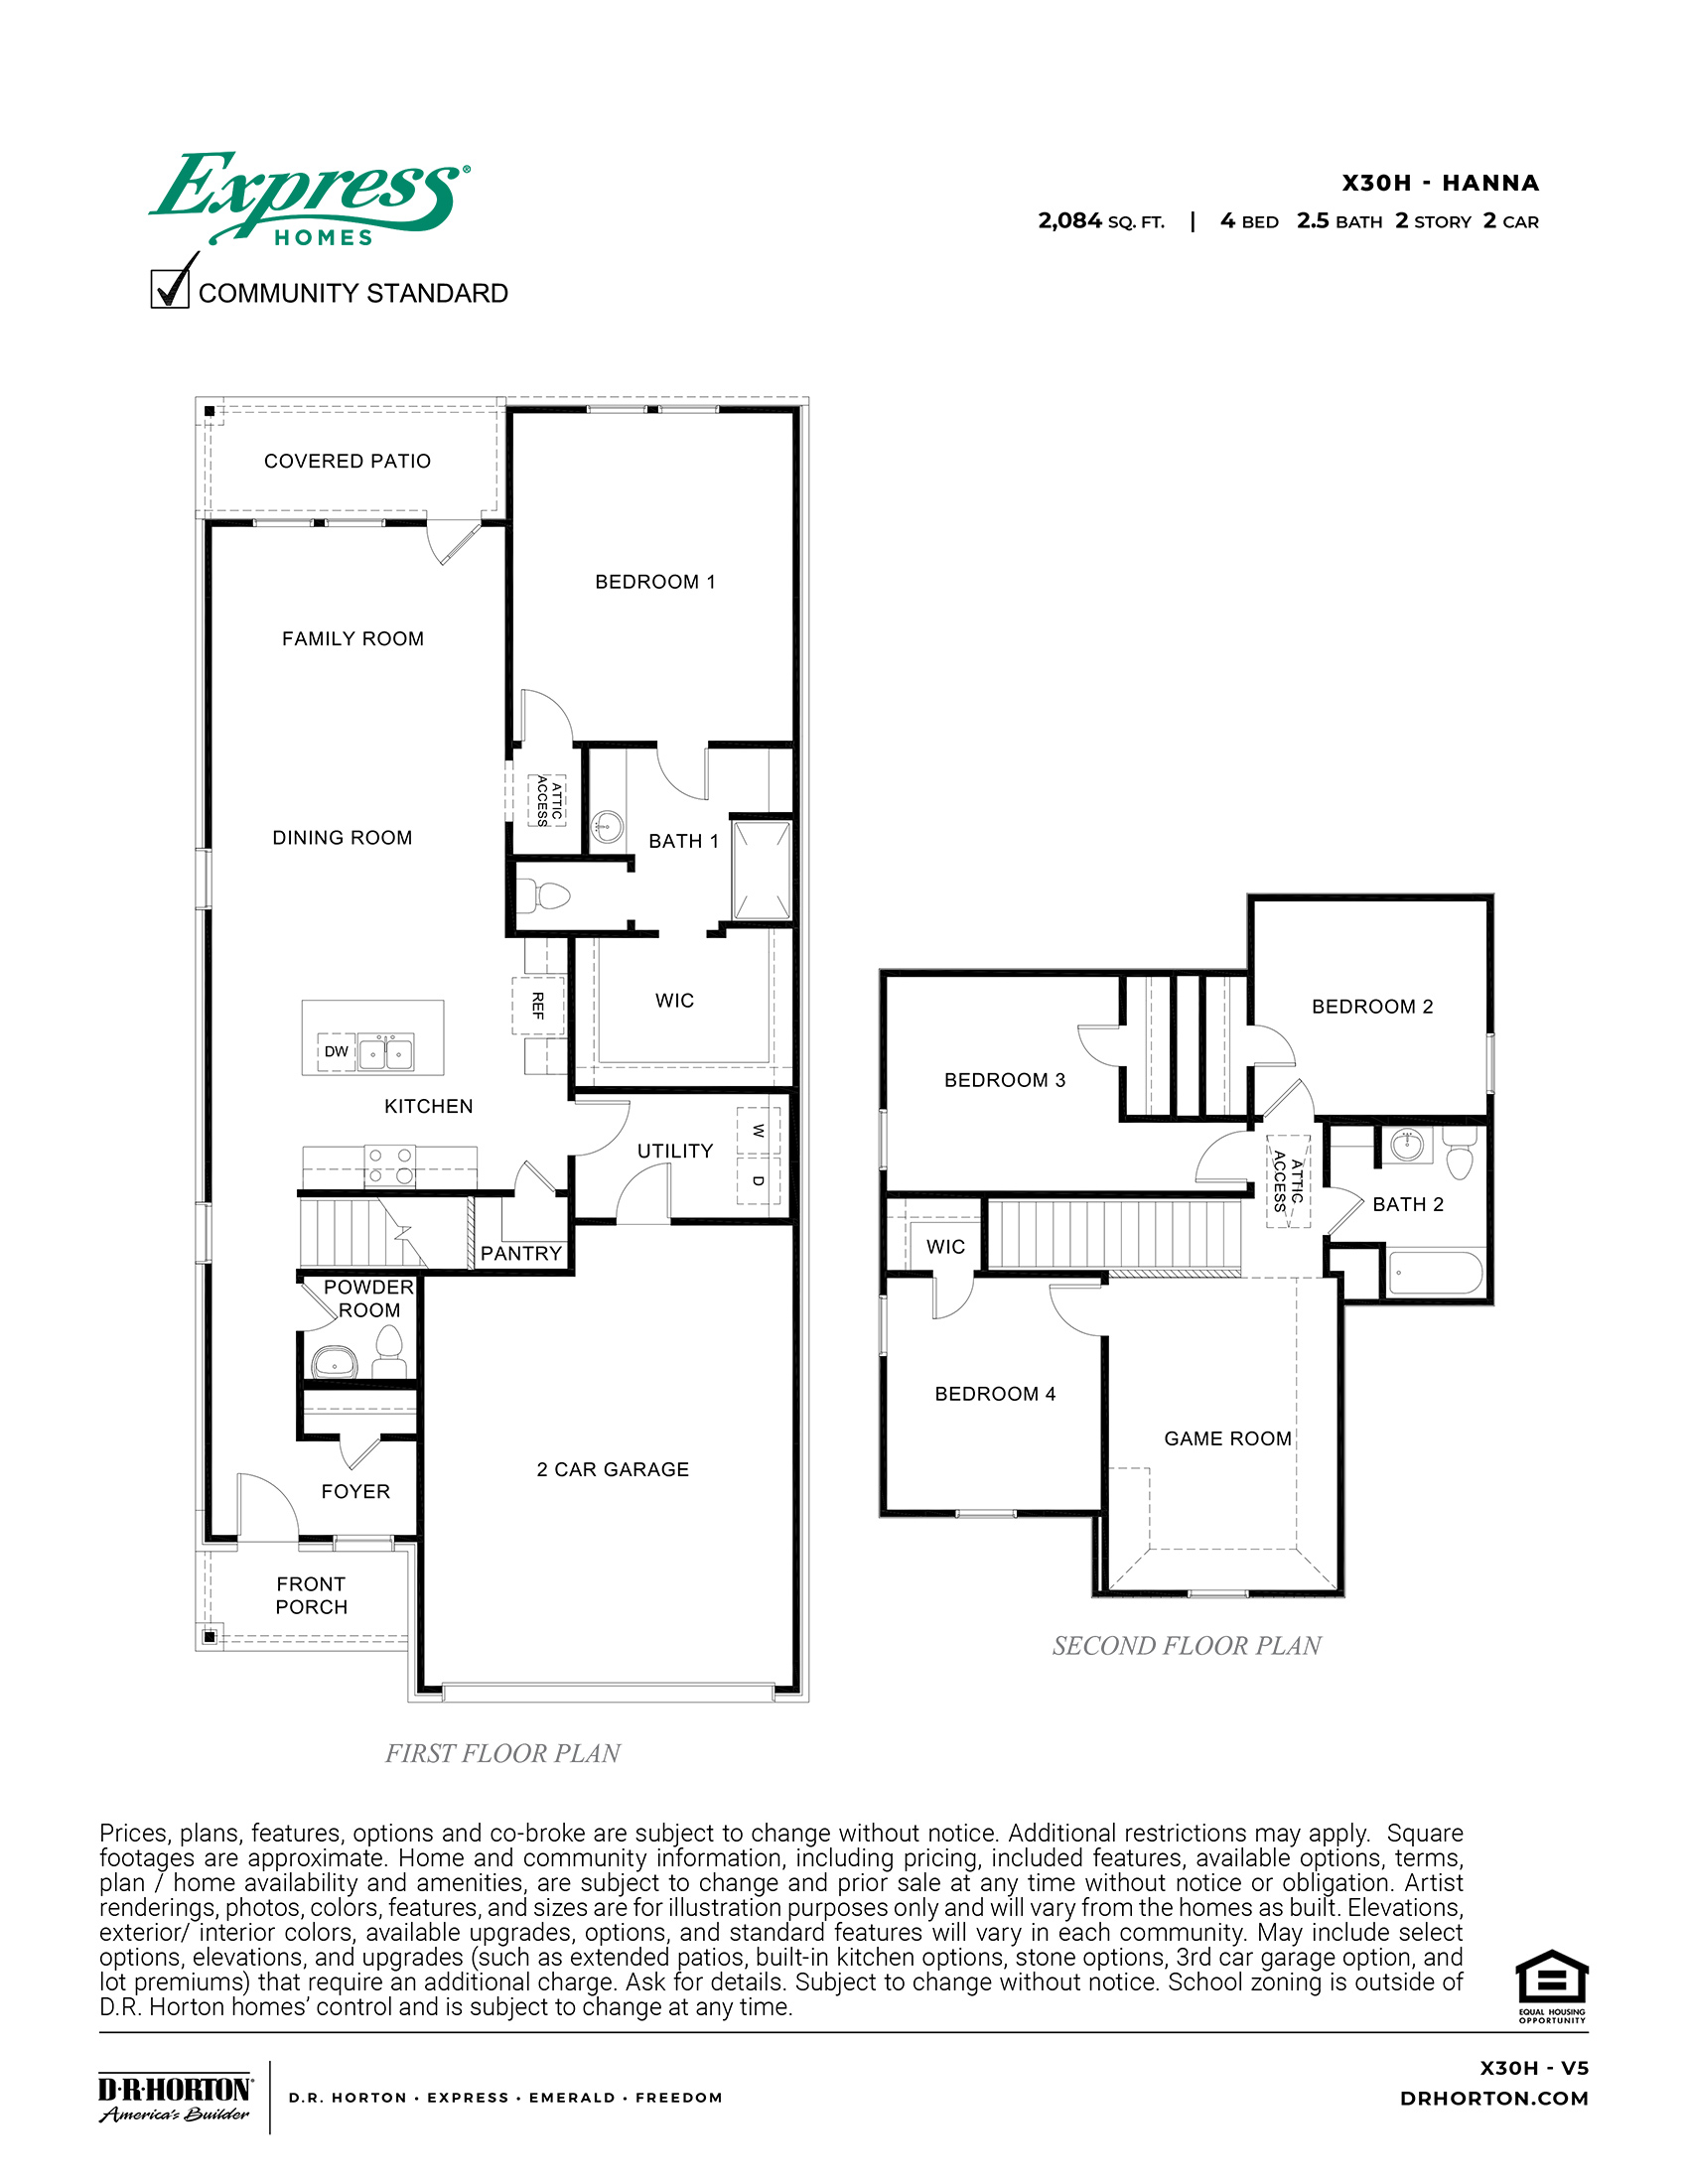 X30H Hanna floorplan rendering - Governor's Lots in Forney TX